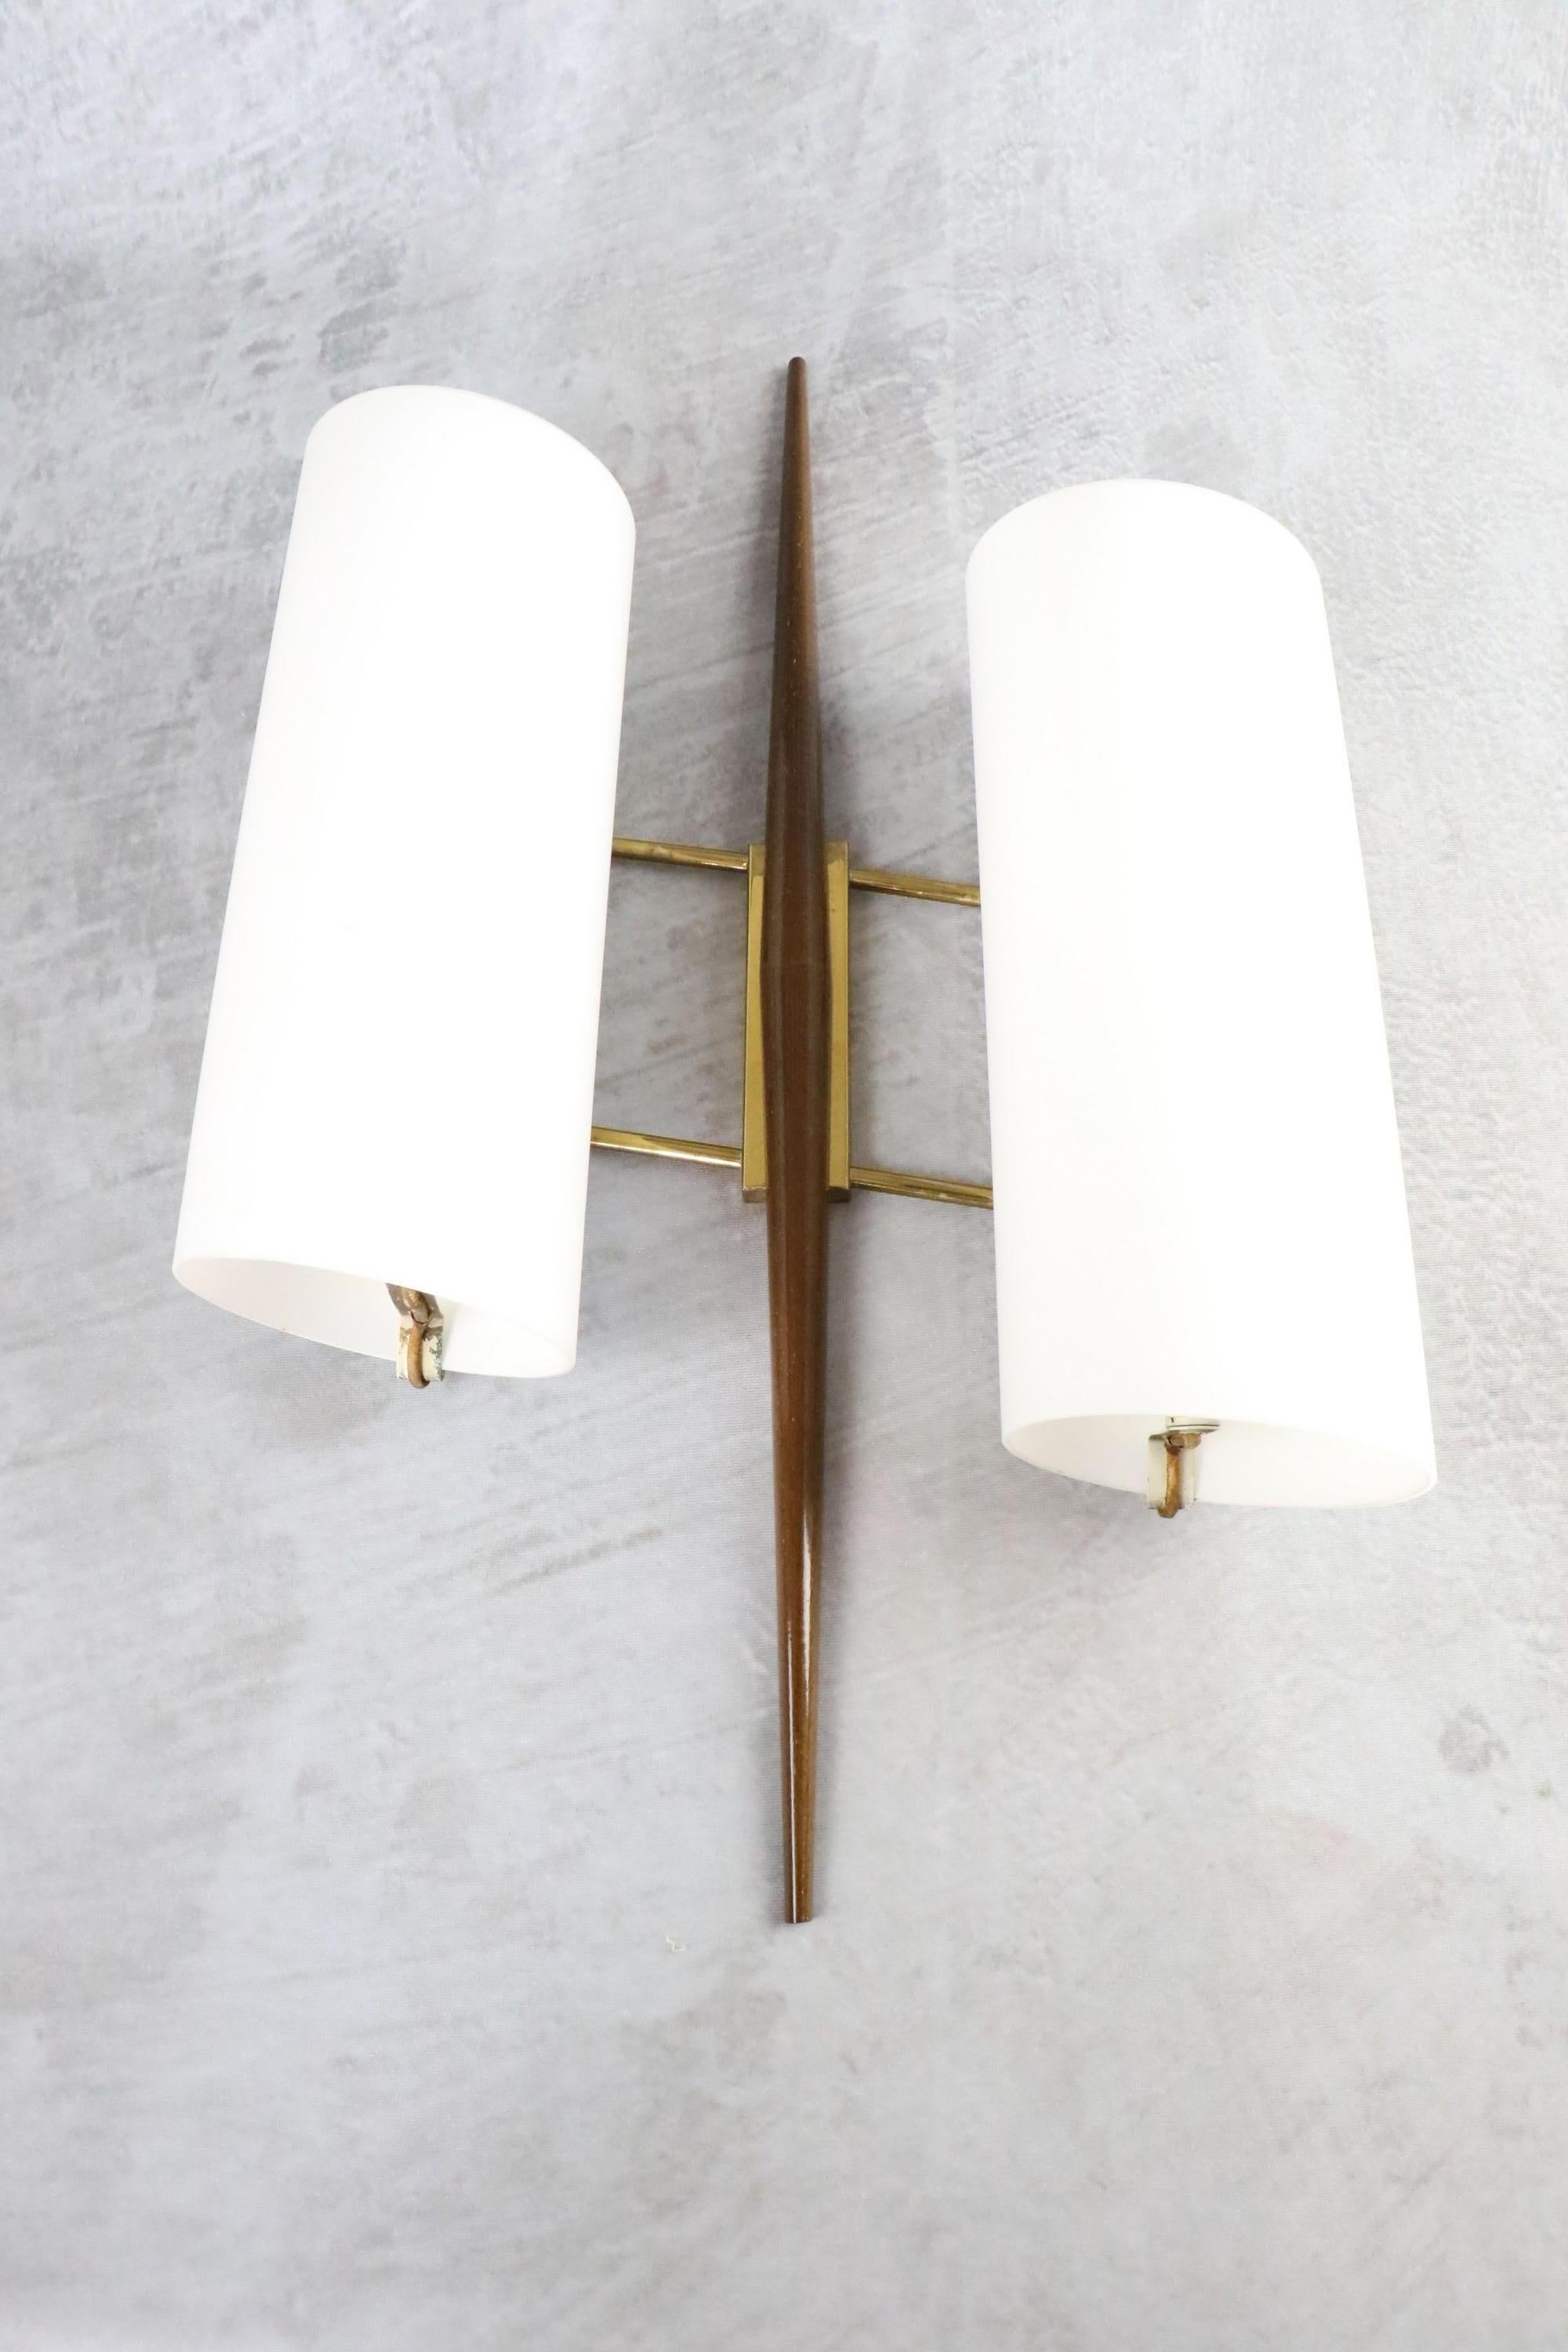 Maison Arlus, Pair of Mid-Century Modern Double Lighting Wall Lamps 1950s France 5